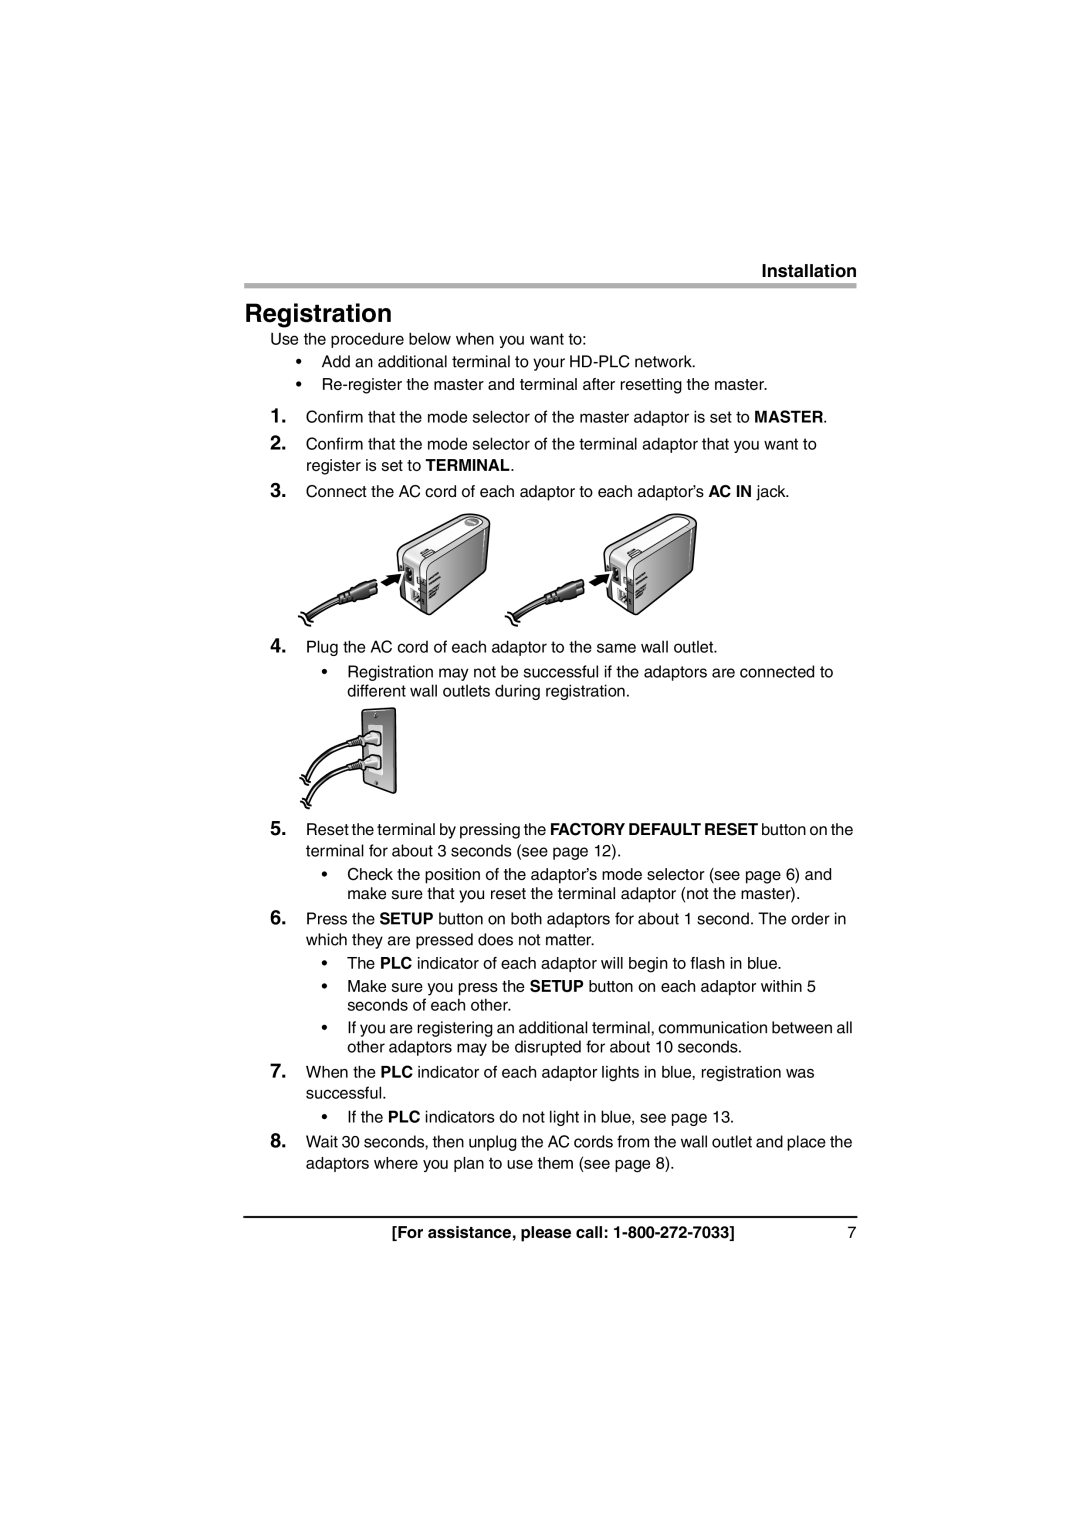 Panasonic BL-PA100A important safety instructions Registration, Installation, For assistance, please call 